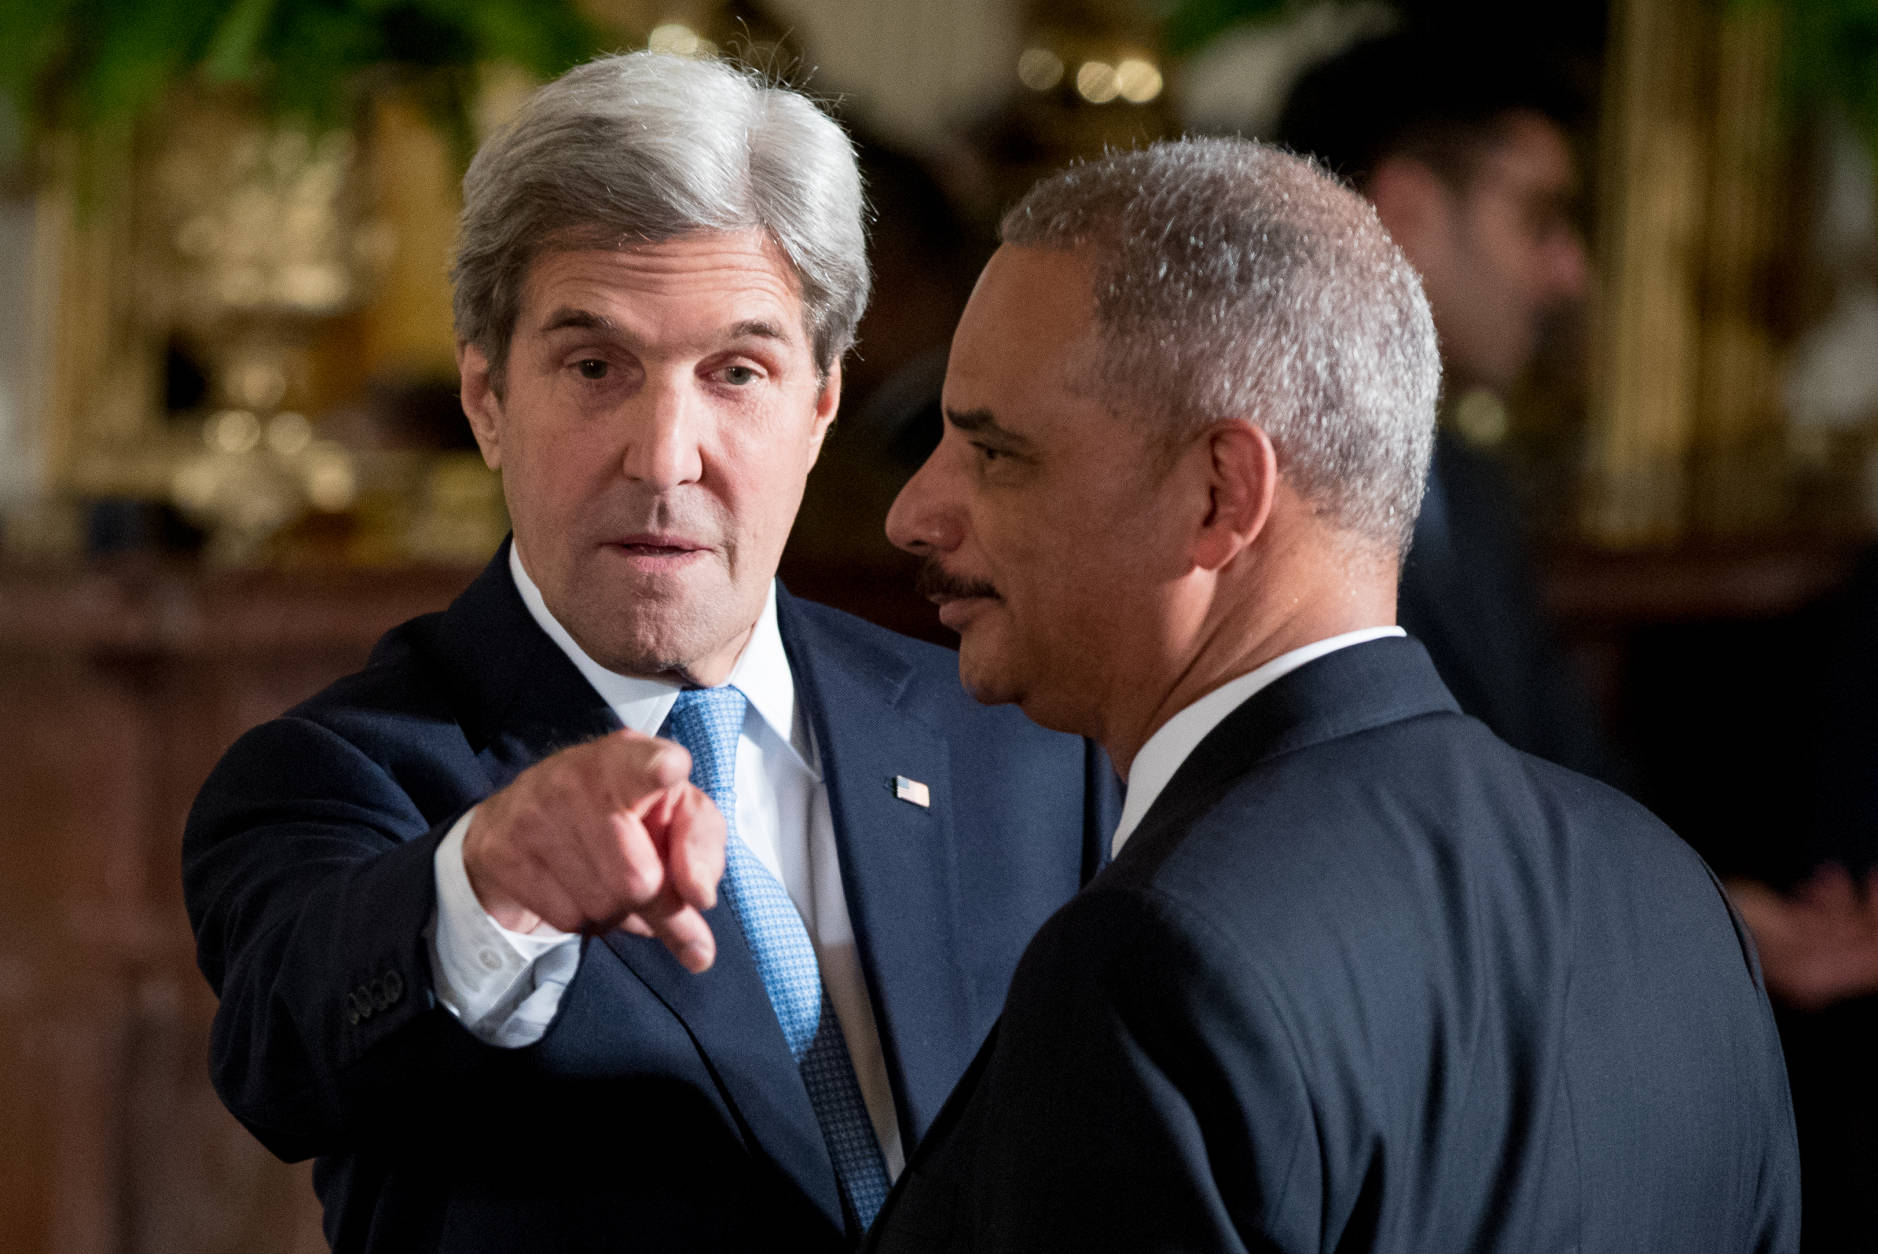 Secretary of State John Kerry, left, and former Attorney General Eric Holder, right, arrive for a Presidential Medal of Freedom ceremony in the East Room of the White House, Tuesday, Nov. 22, 2016, in Washington. Obama is recognizing 21 Americans with the nation's highest civilian award, including giants of the entertainment industry, sports legends, activists and innovators. (AP Photo/Andrew Harnik)